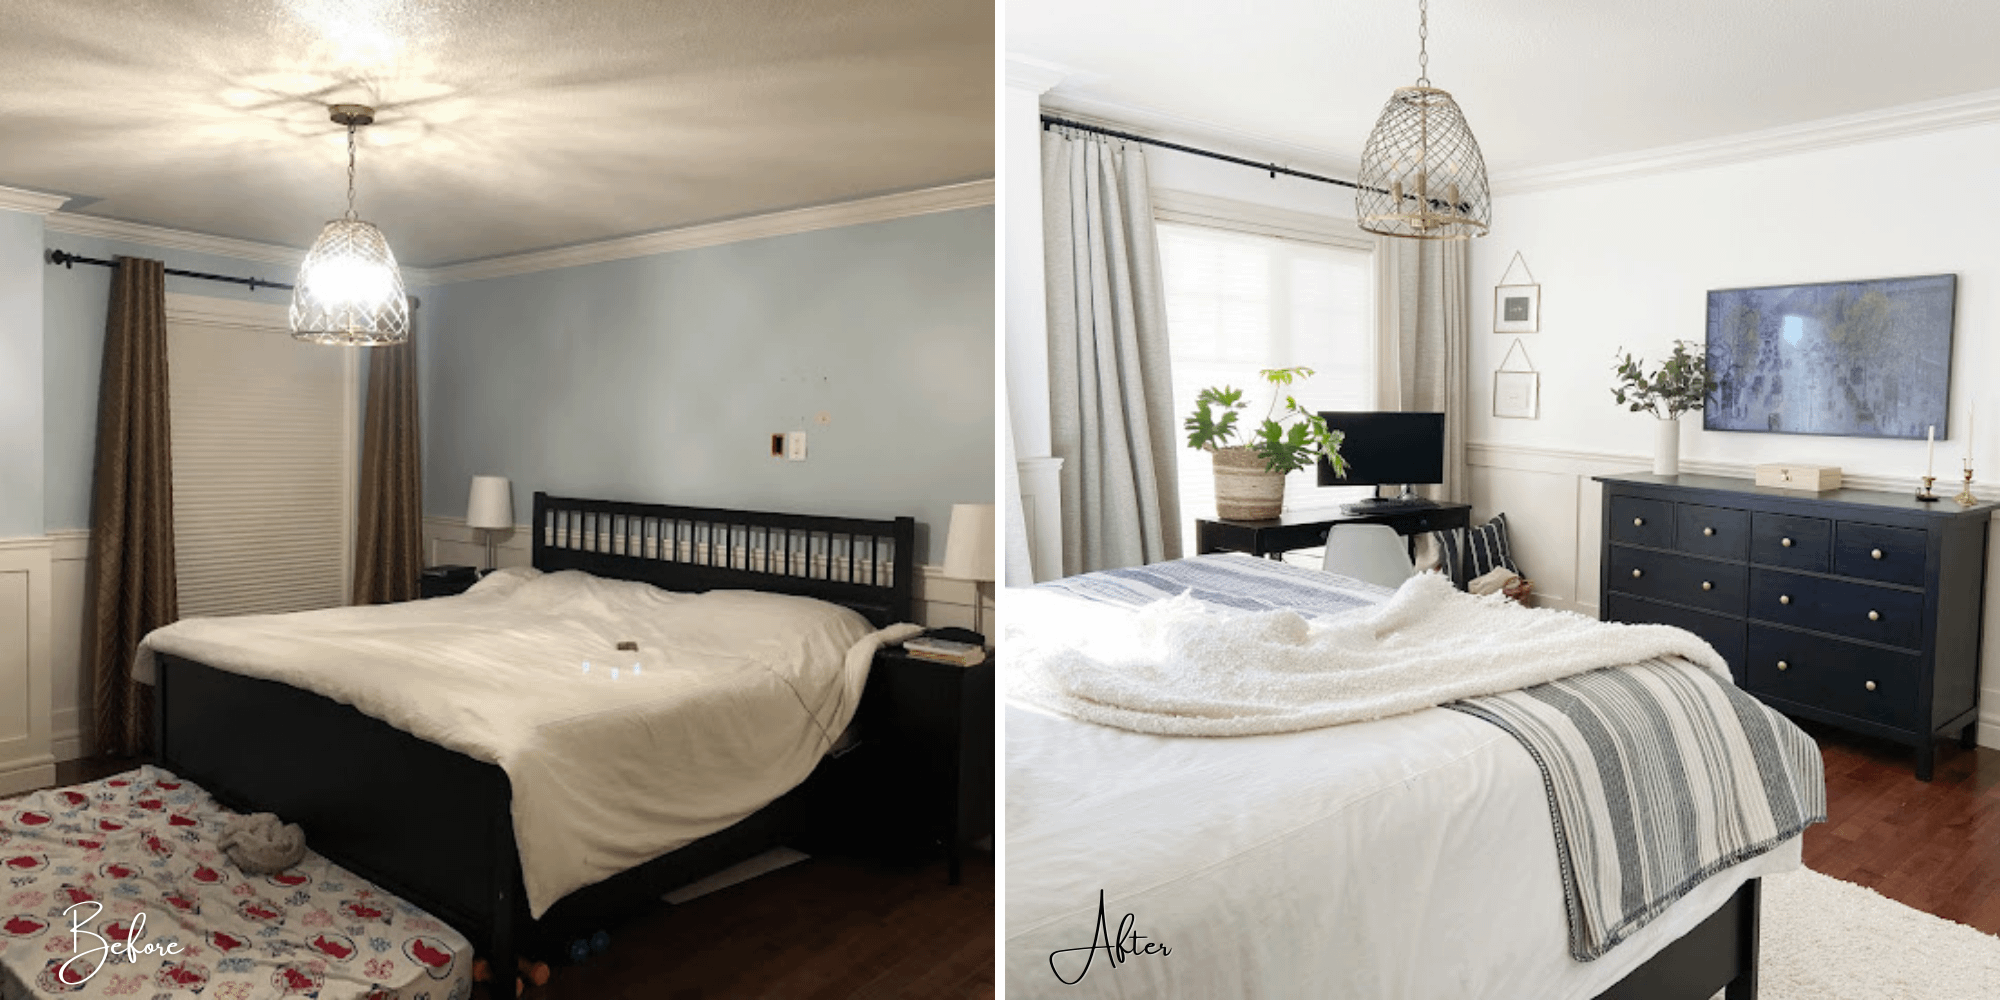 Before and after of a peaceful bedroom makeover.